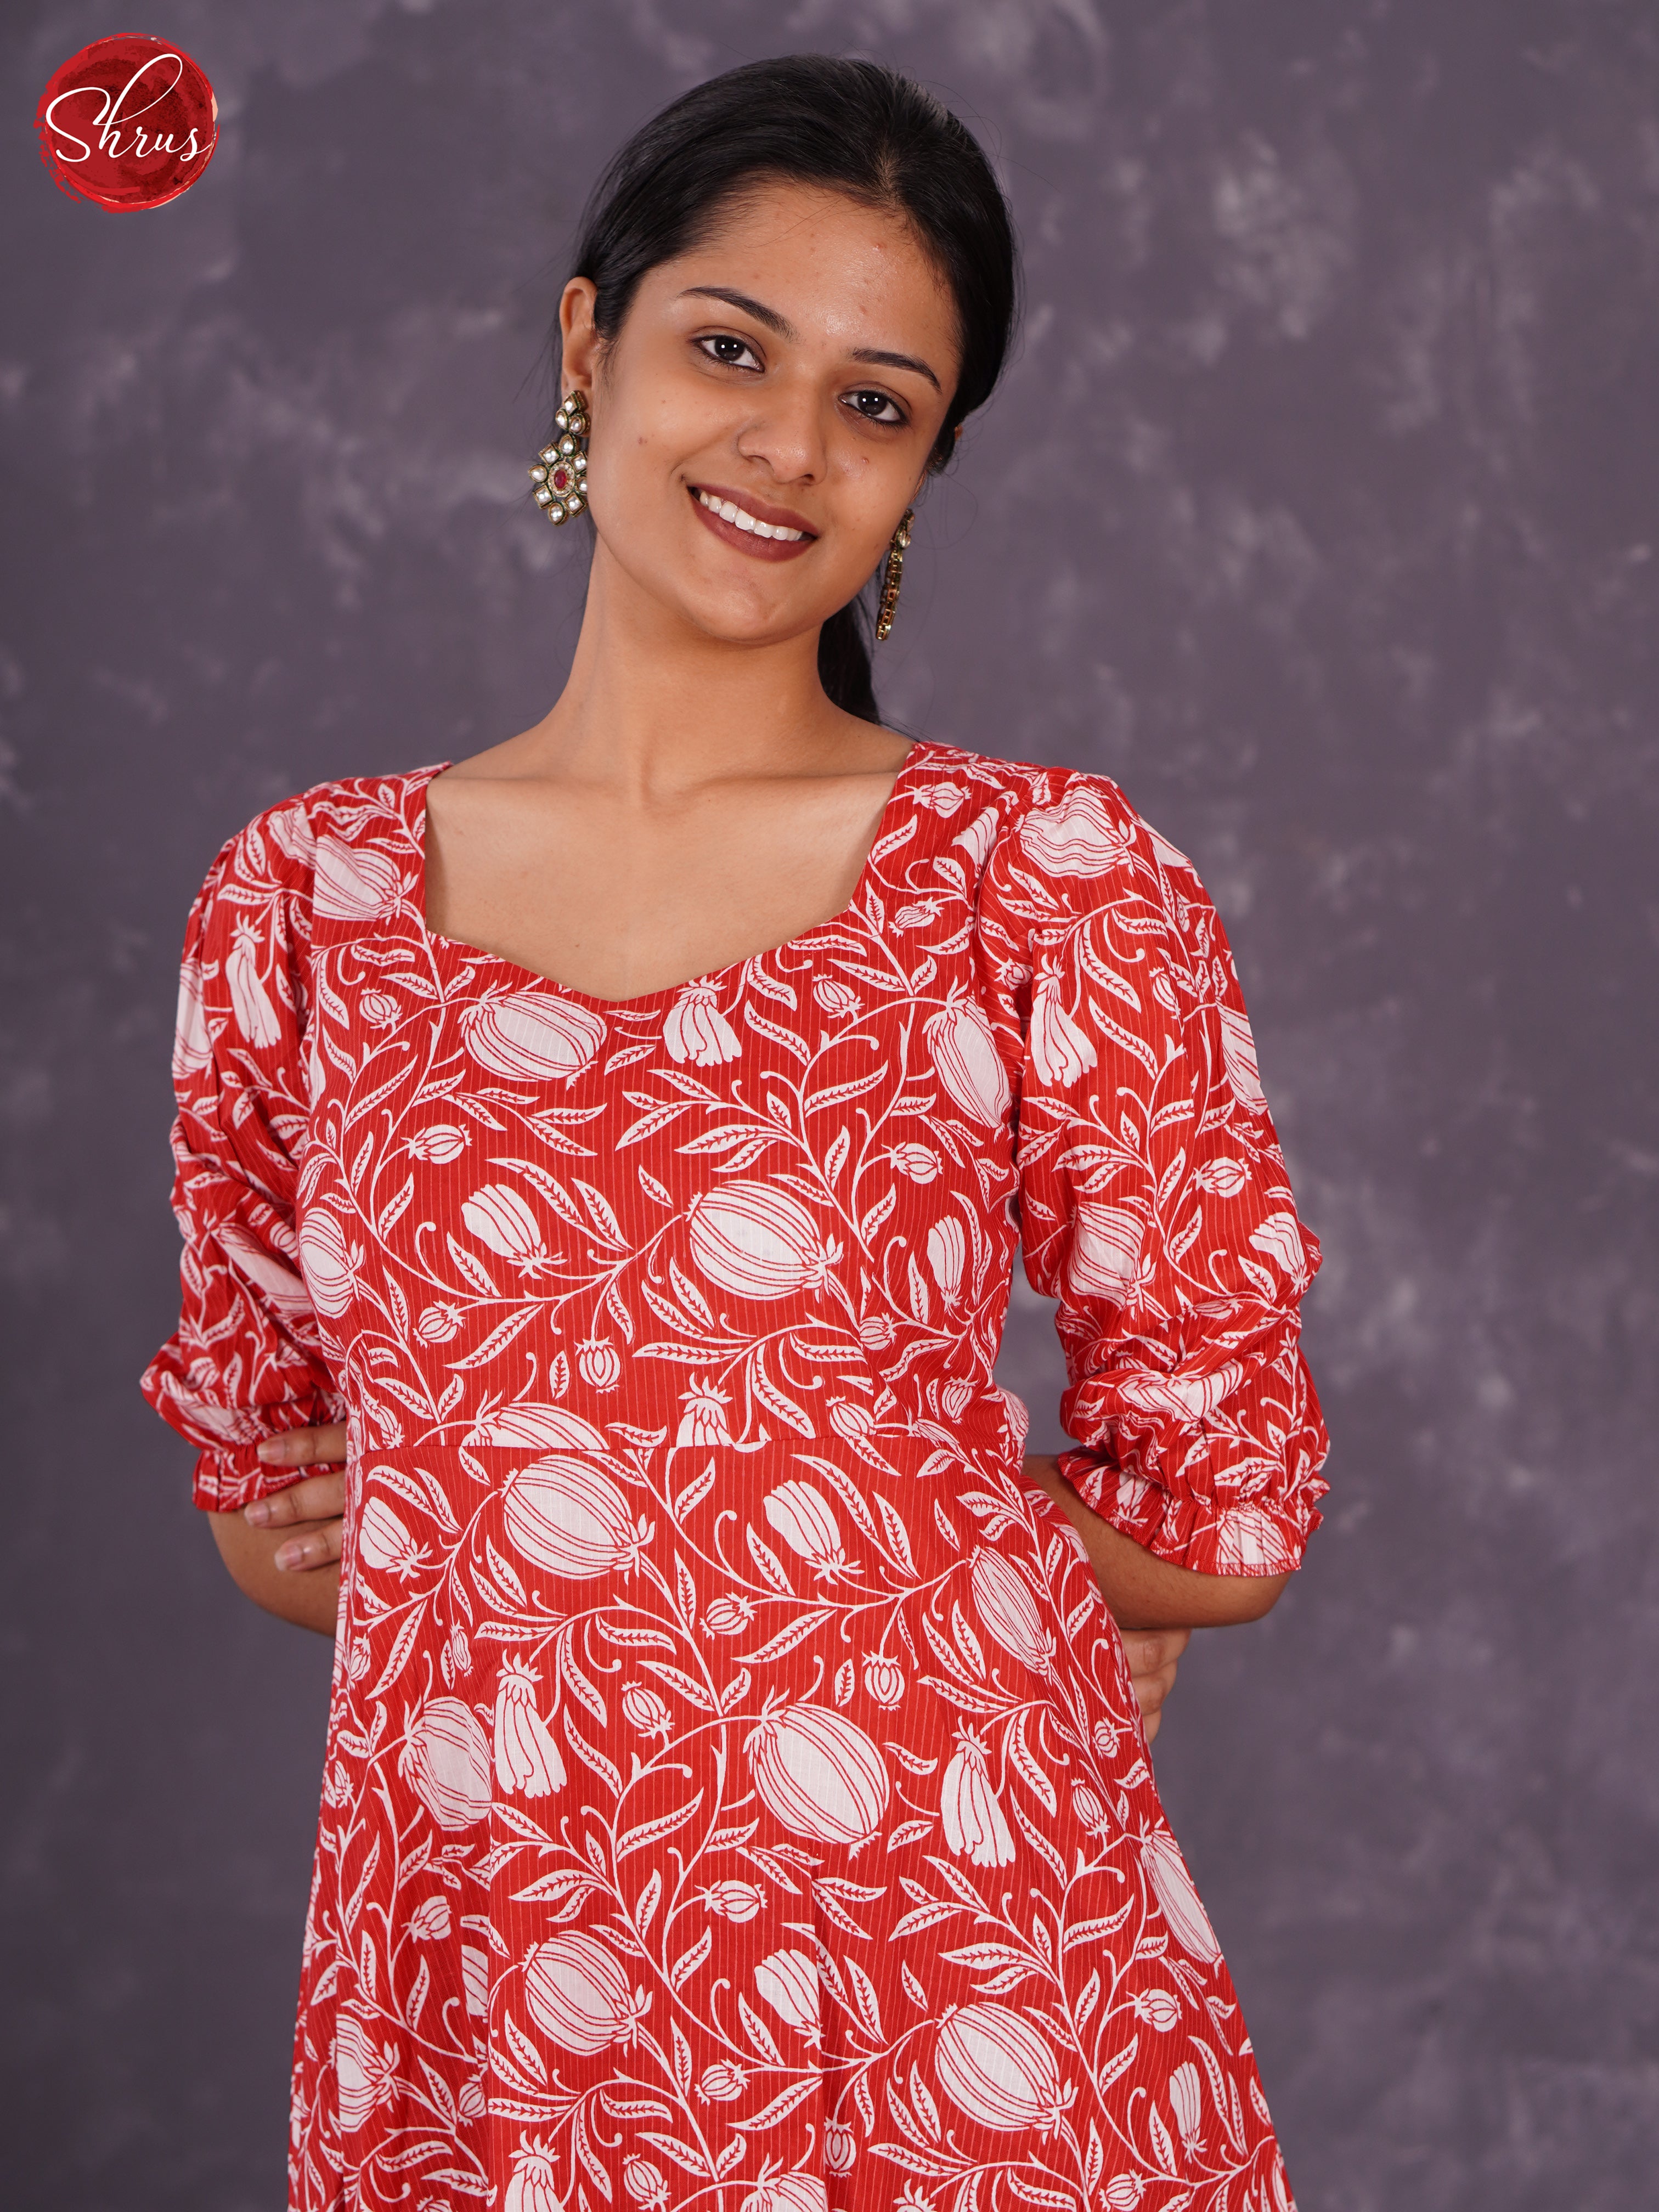 Red - Readymade kurti  with floral print , frilled pattern - Shop on ShrusEternity.com